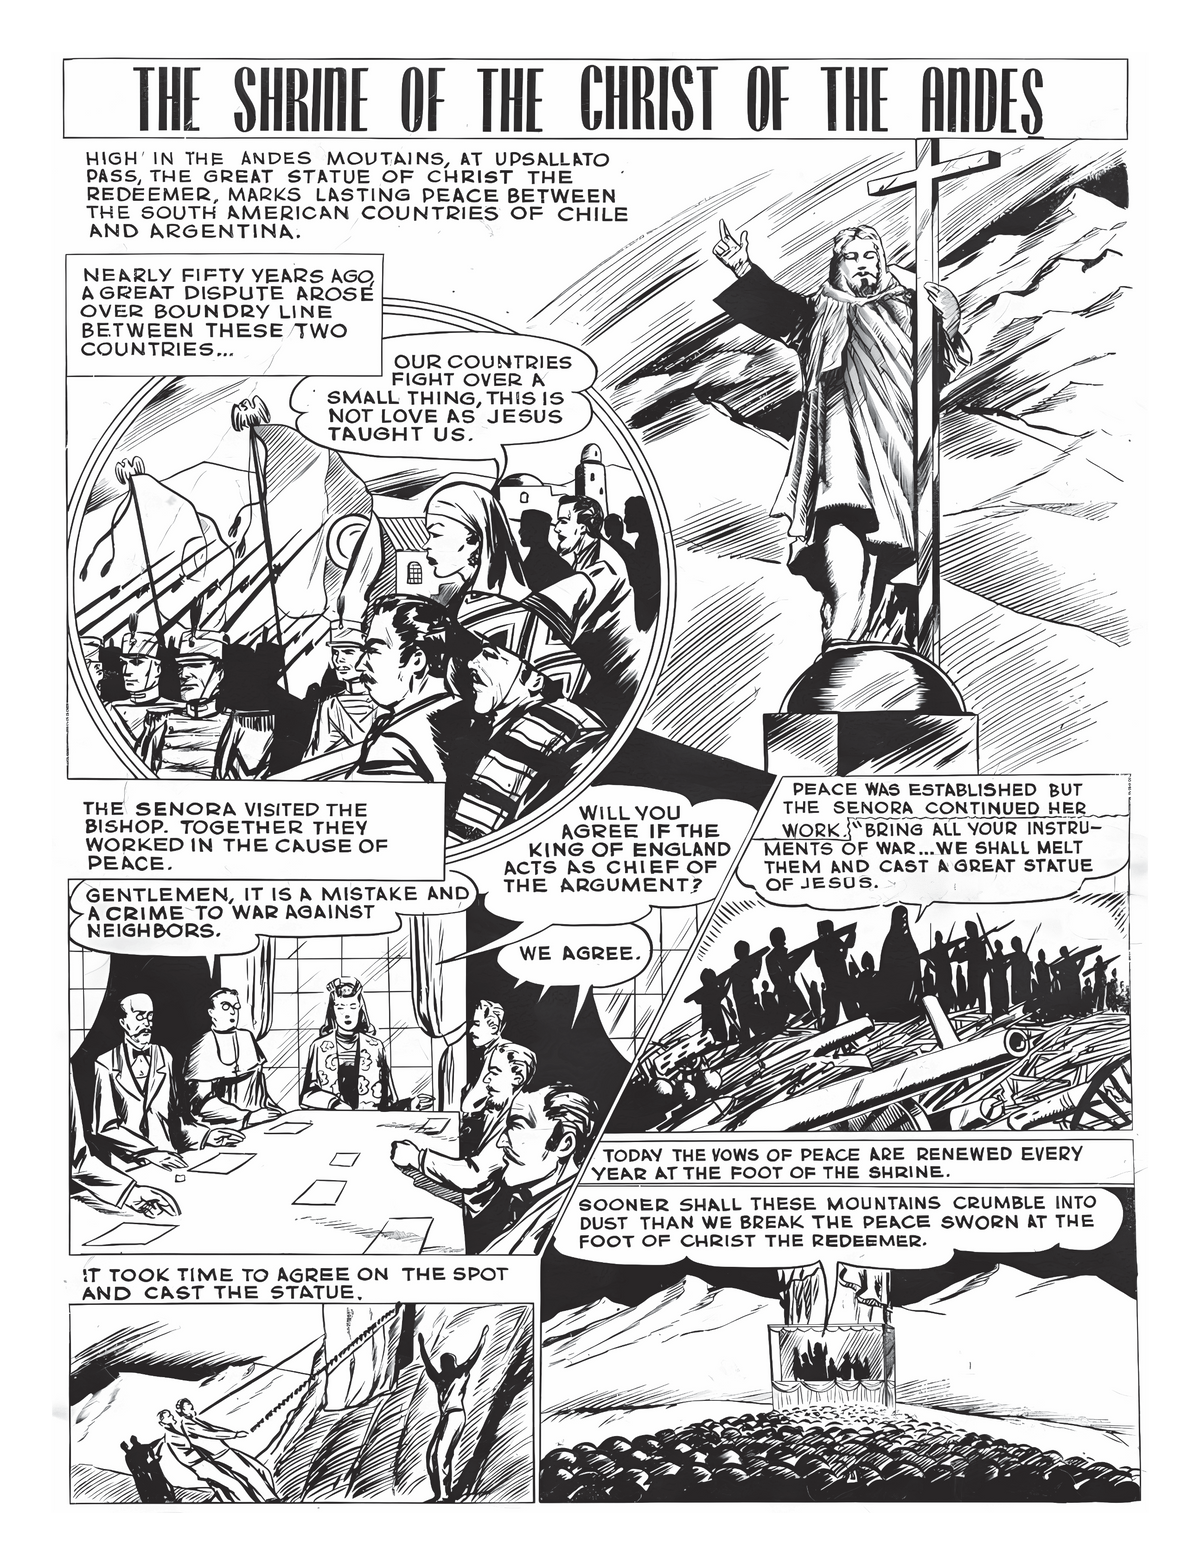 The Shrine of Christ of the Andes - Catholic Comic Book Coloring Page